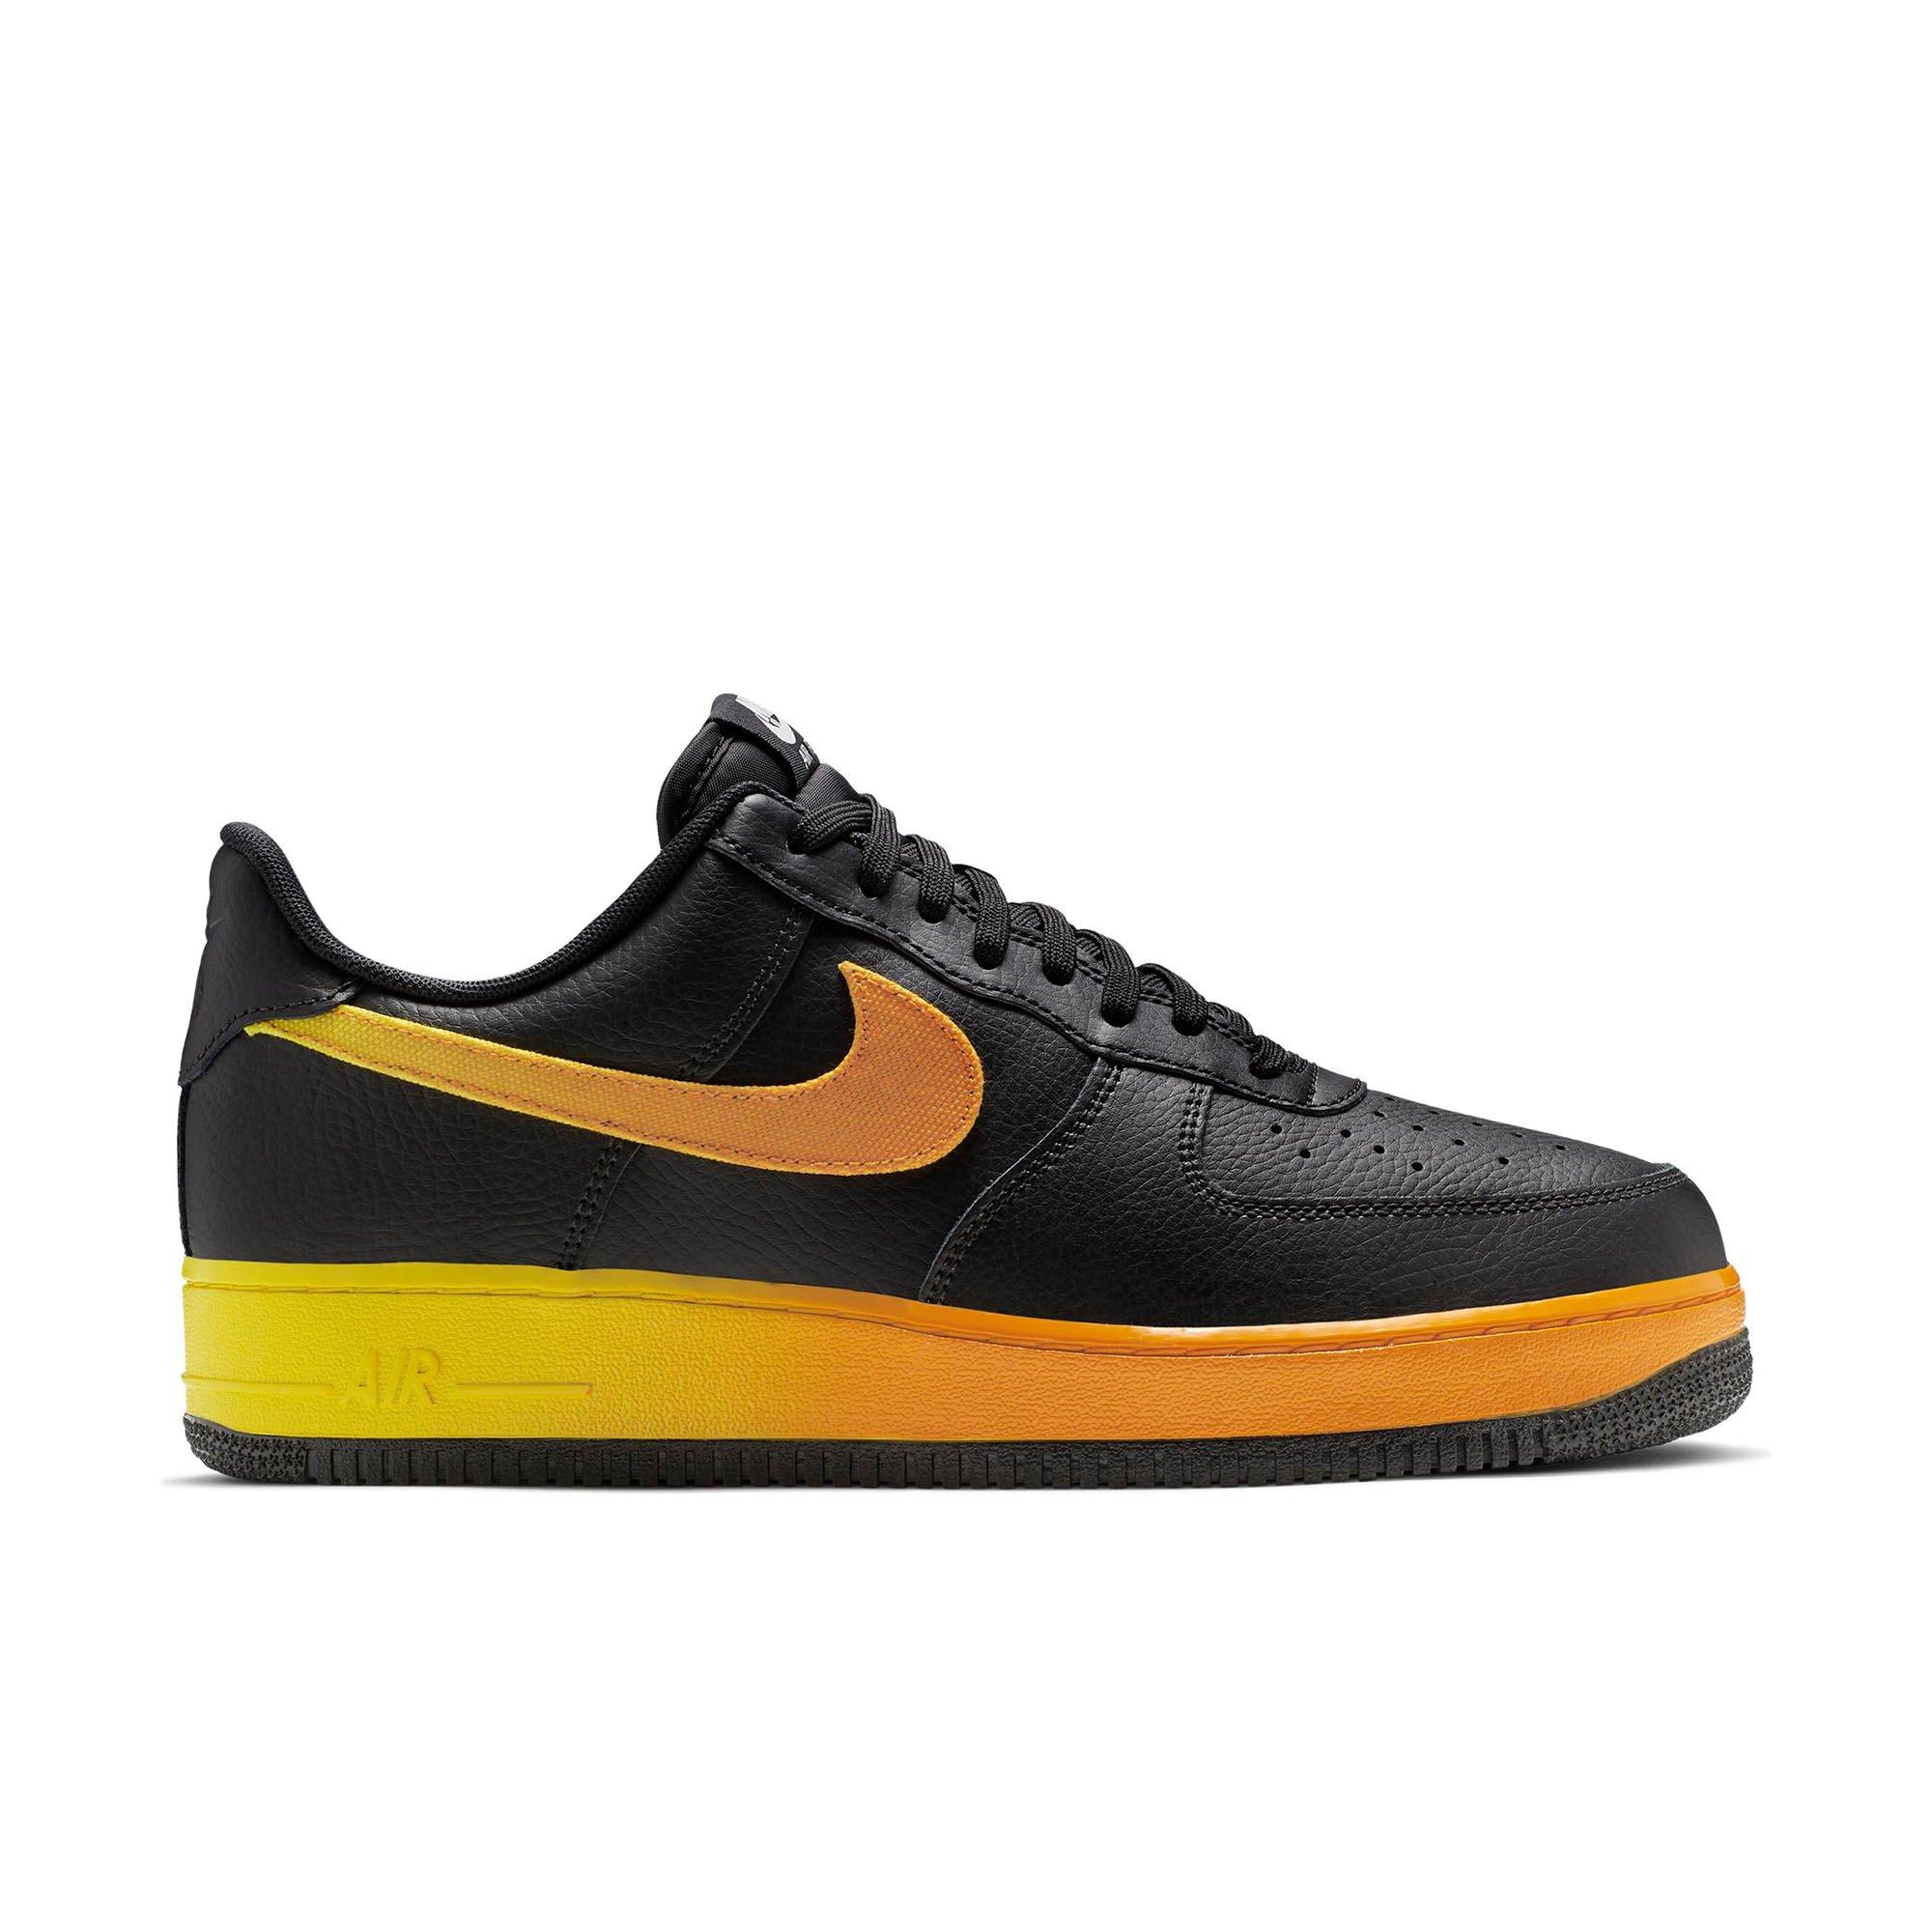 air force one black and yellow